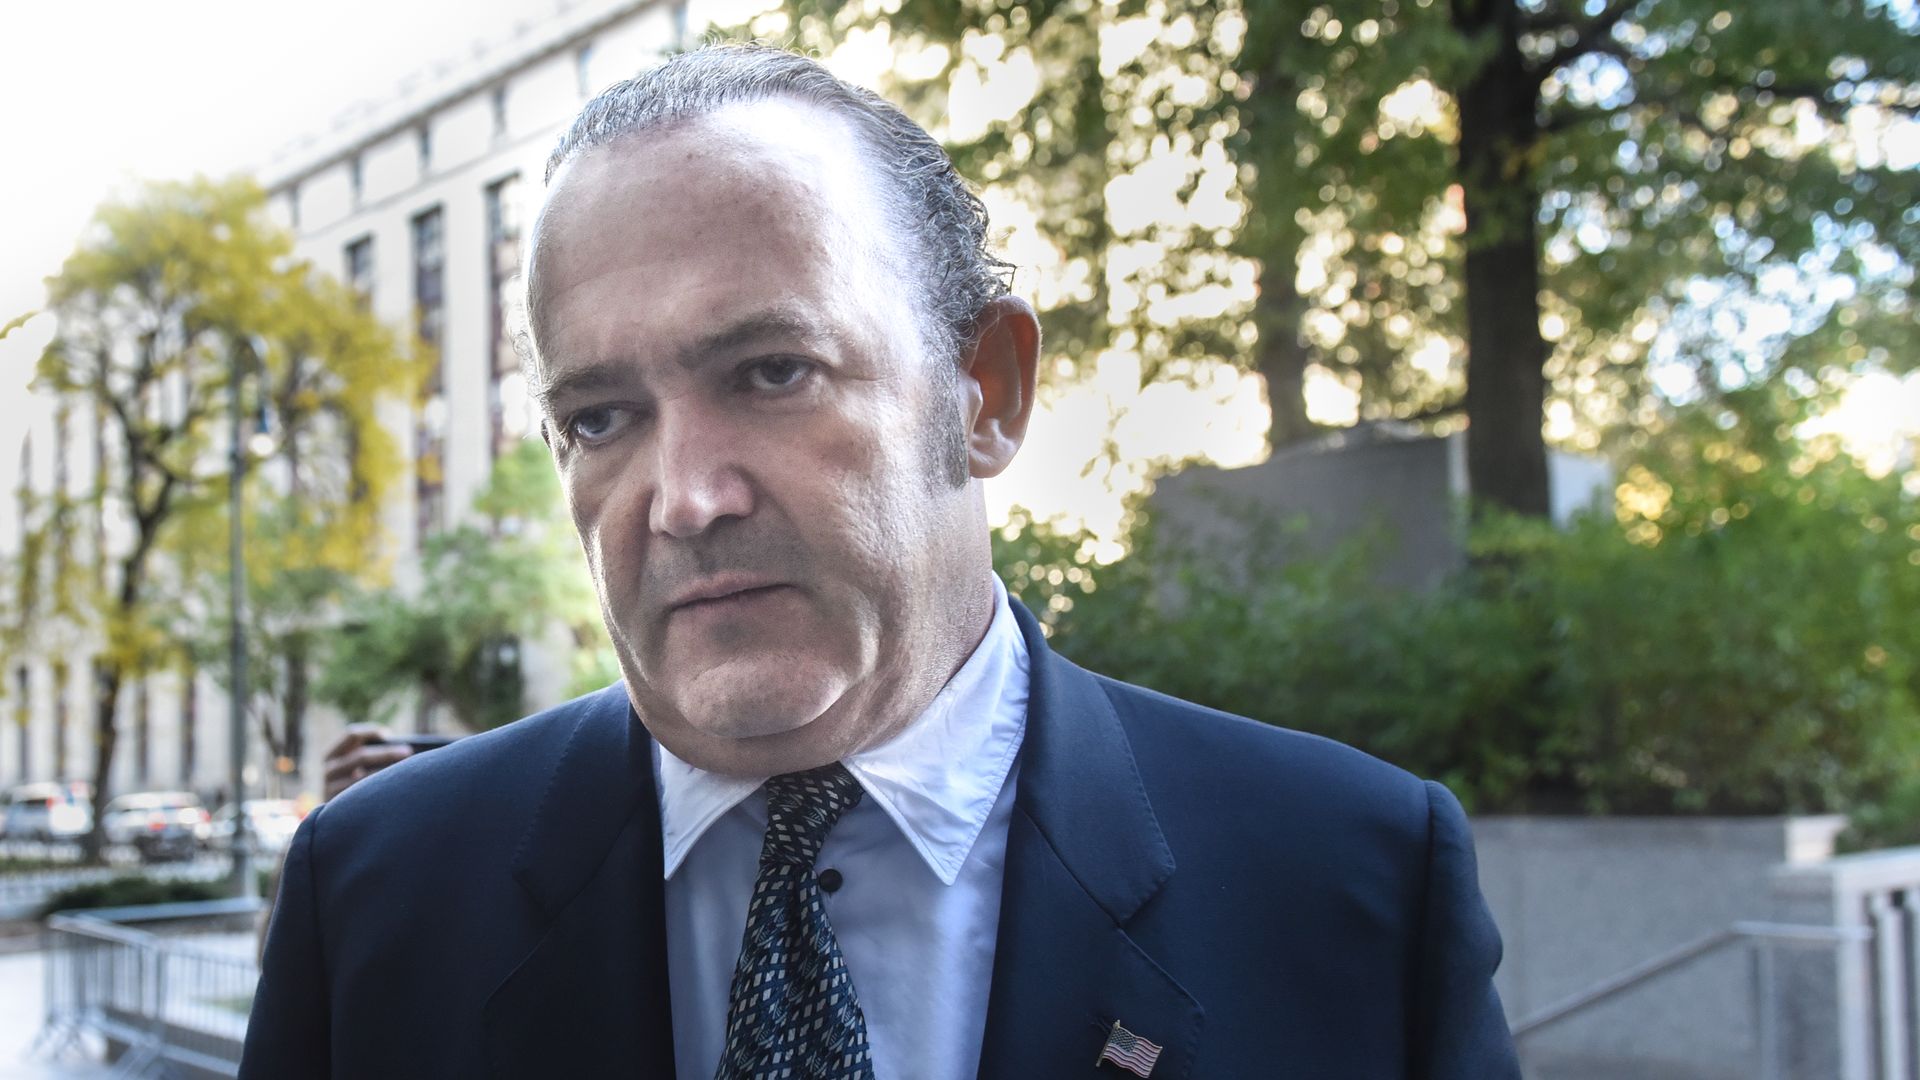 Igor Fruman at a federal court in New York City in October 2019.